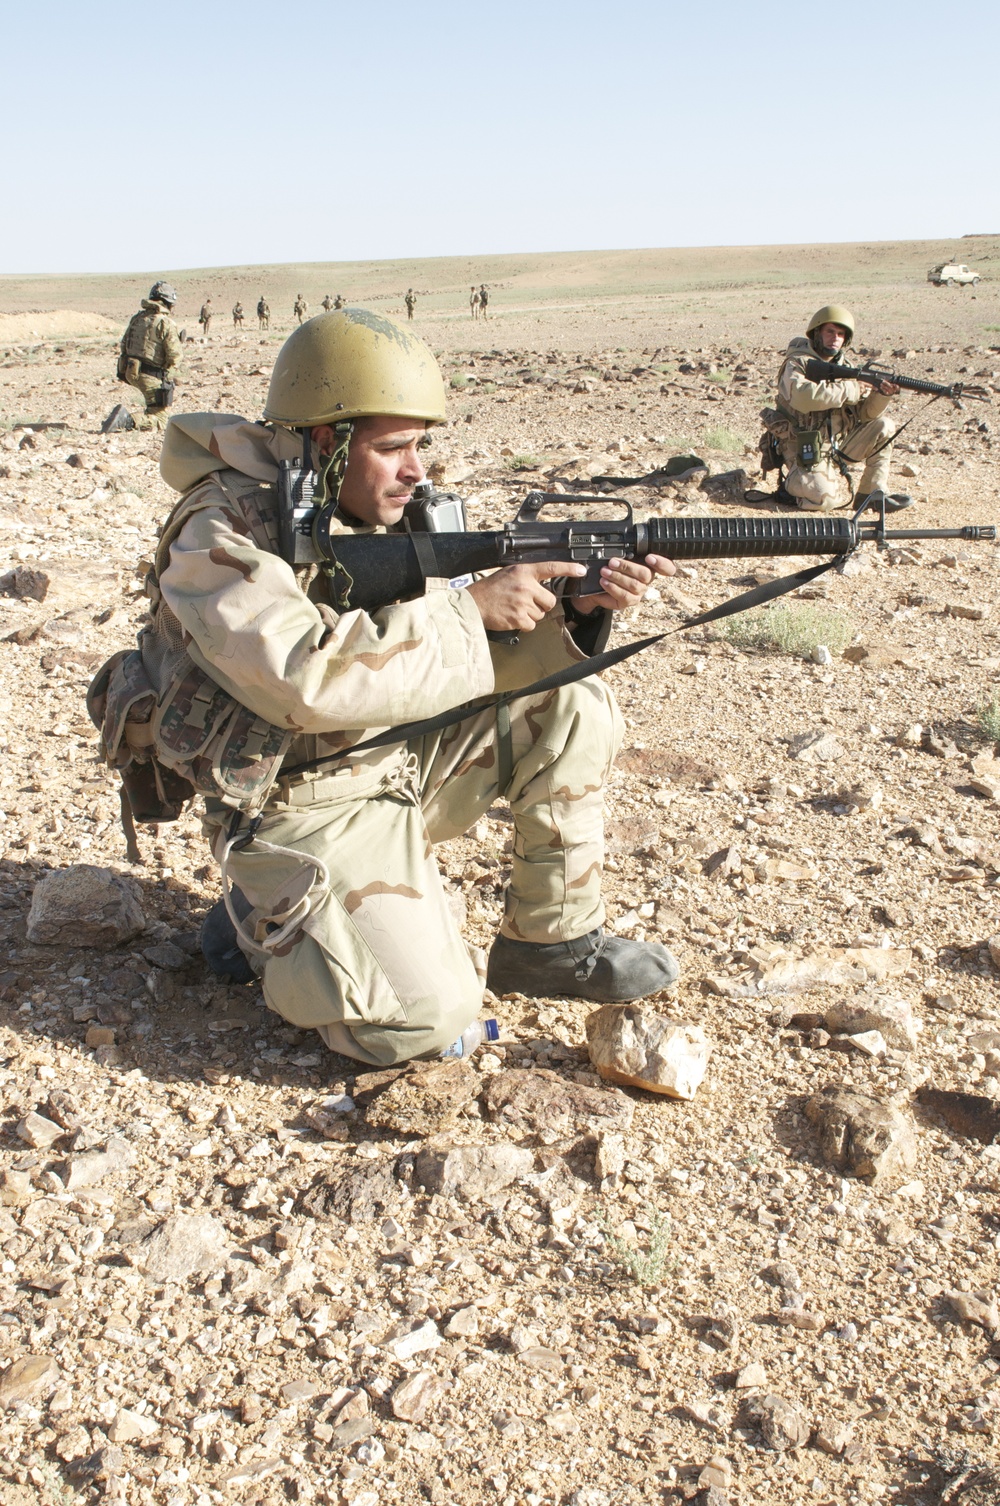 Canadian, Jordanian SOF conduct CBRN training during Eager Lion 2014